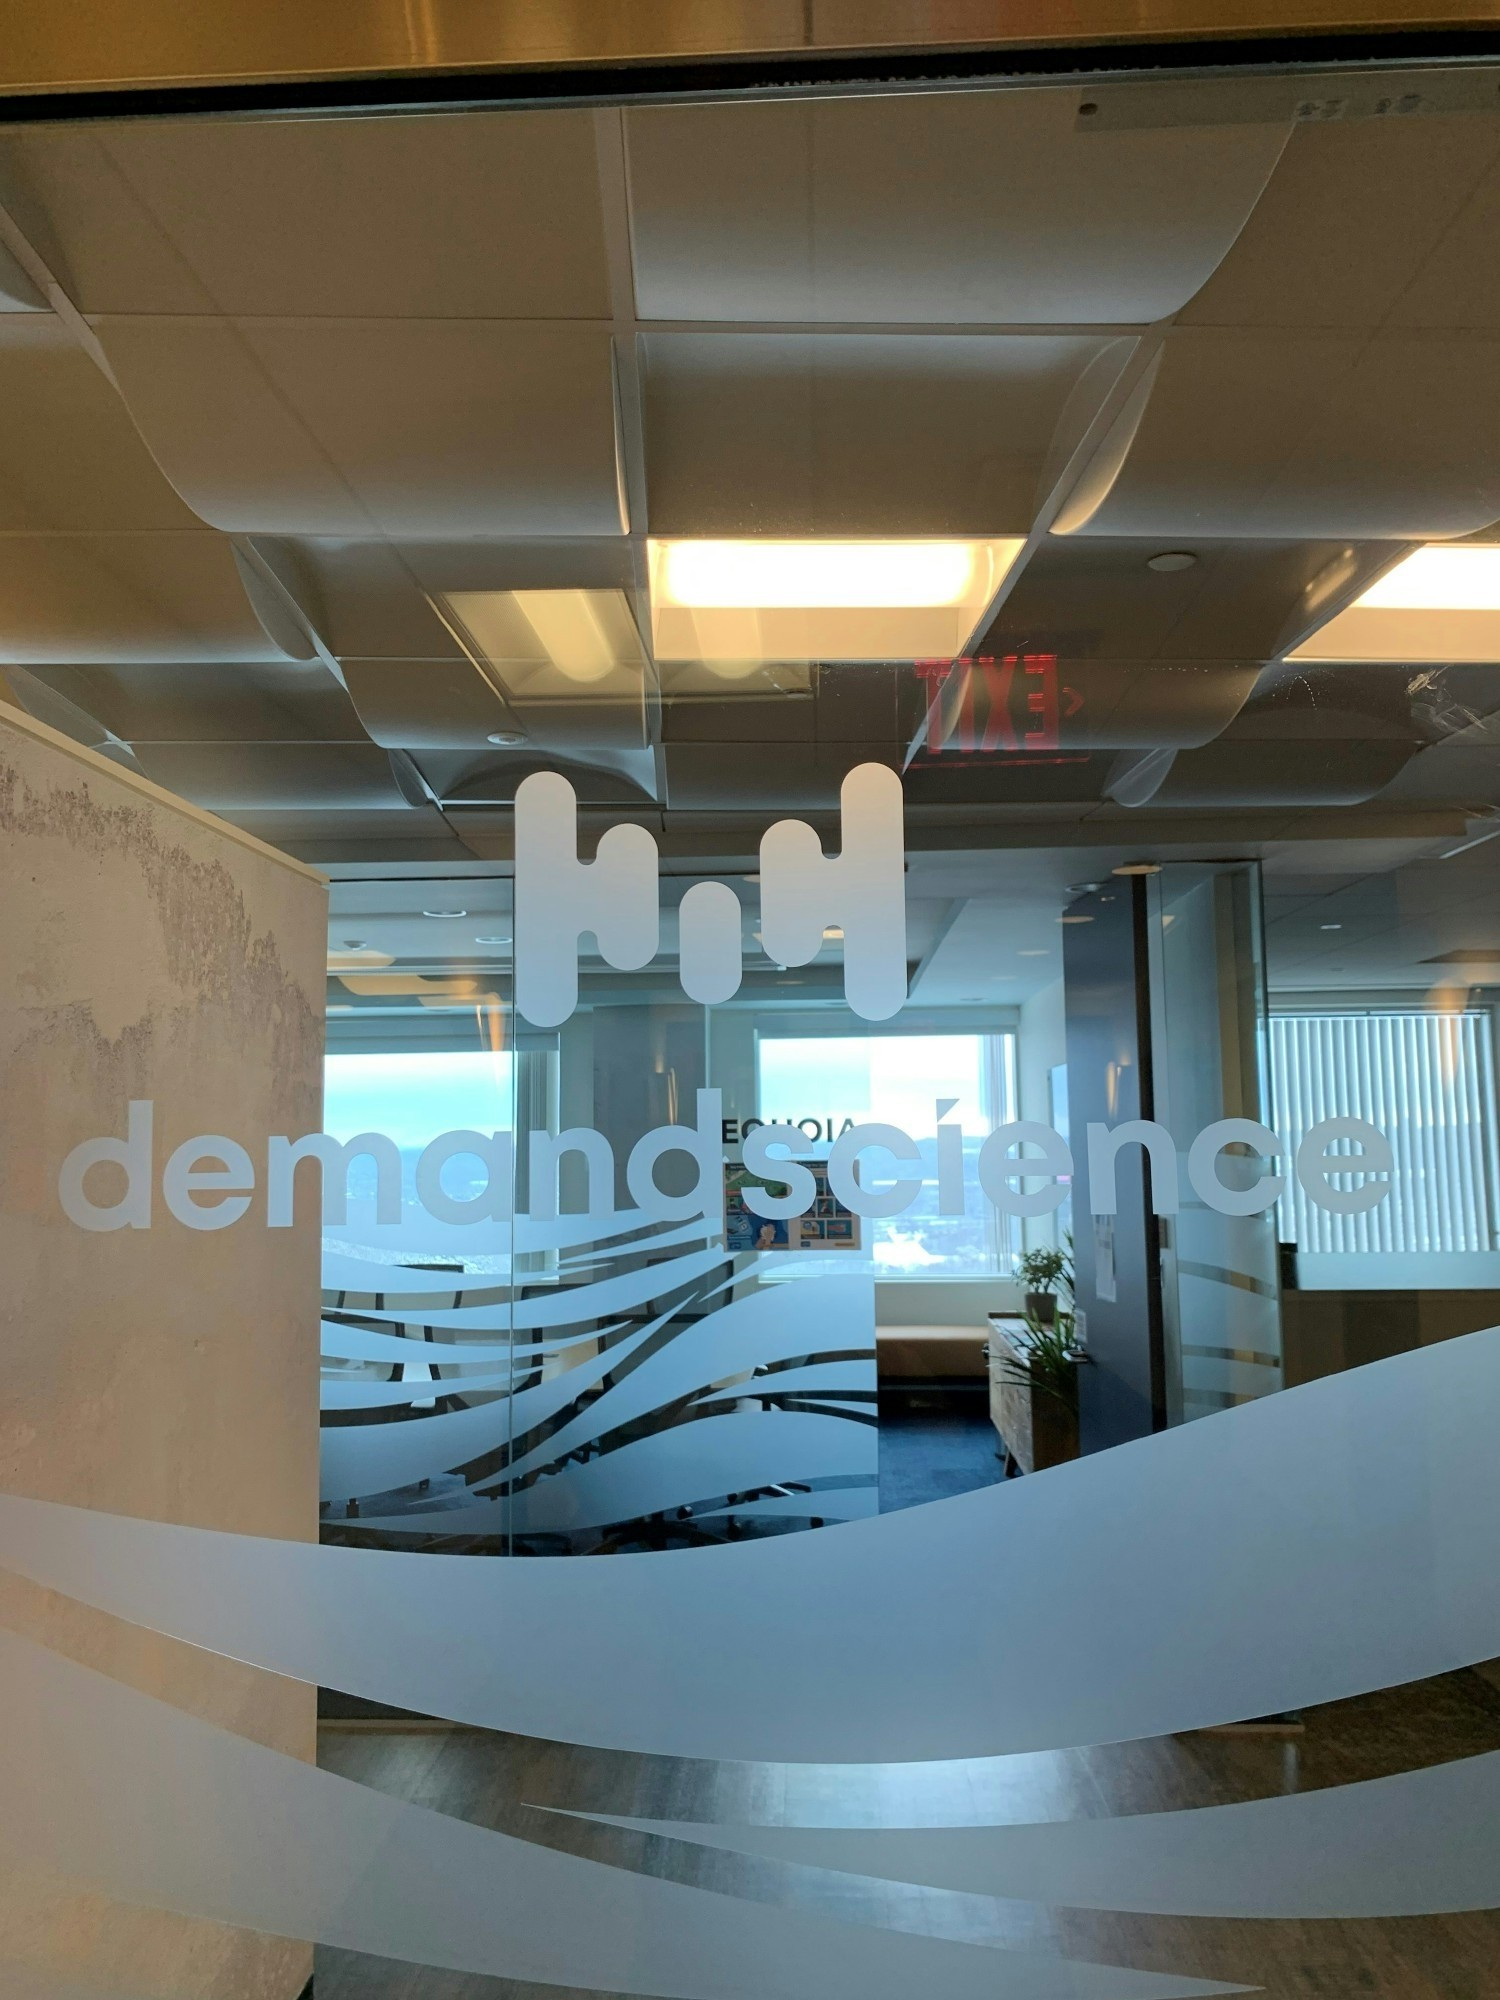 DemandScience offices